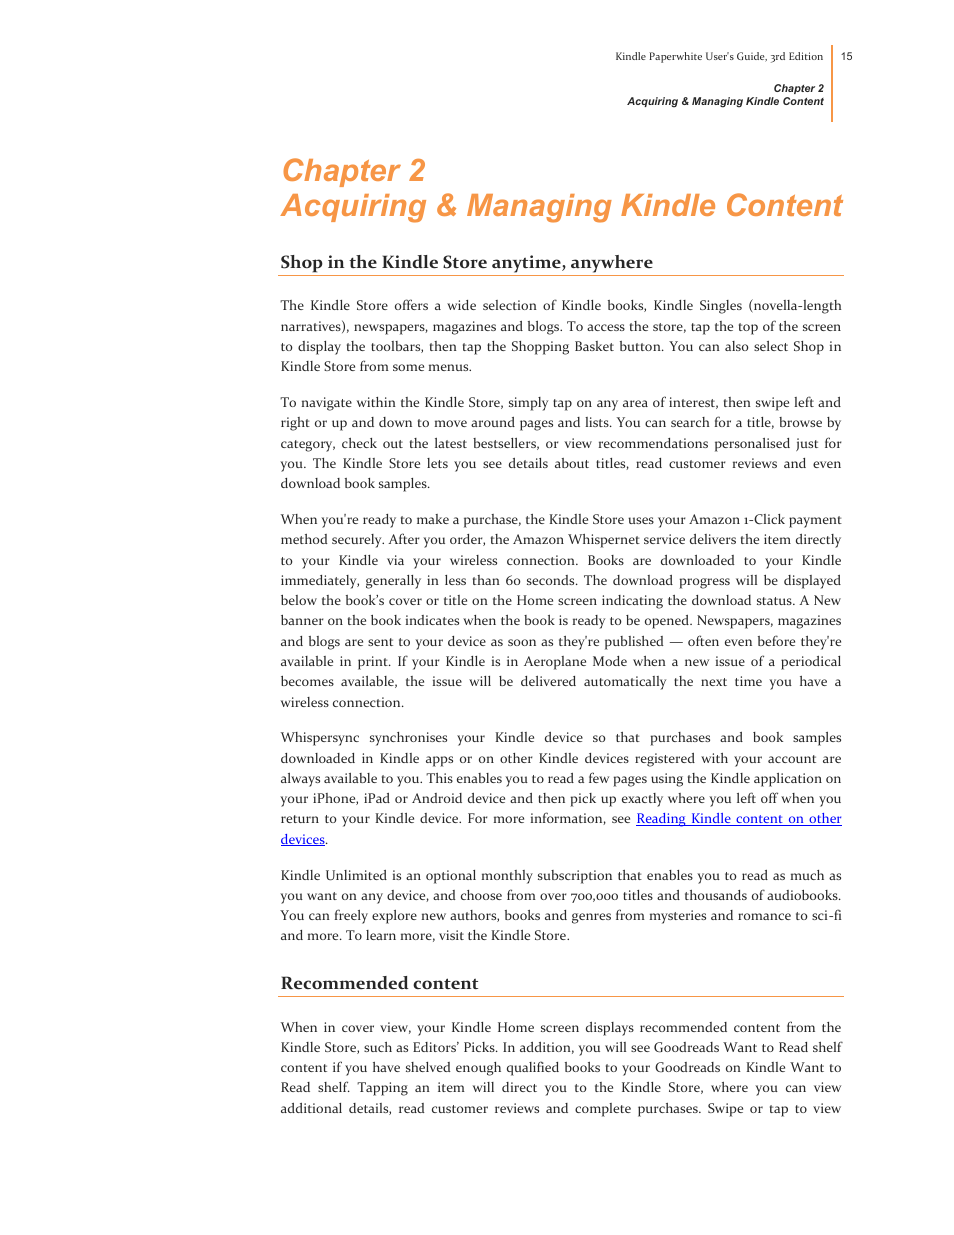 Chapter 2 acquiring & managing kindle content, Shop in the kindle store anytime, anywhere, Recommended content | Kindle Paperwhite (2nd Generation) User Manual | Page 15 / 47